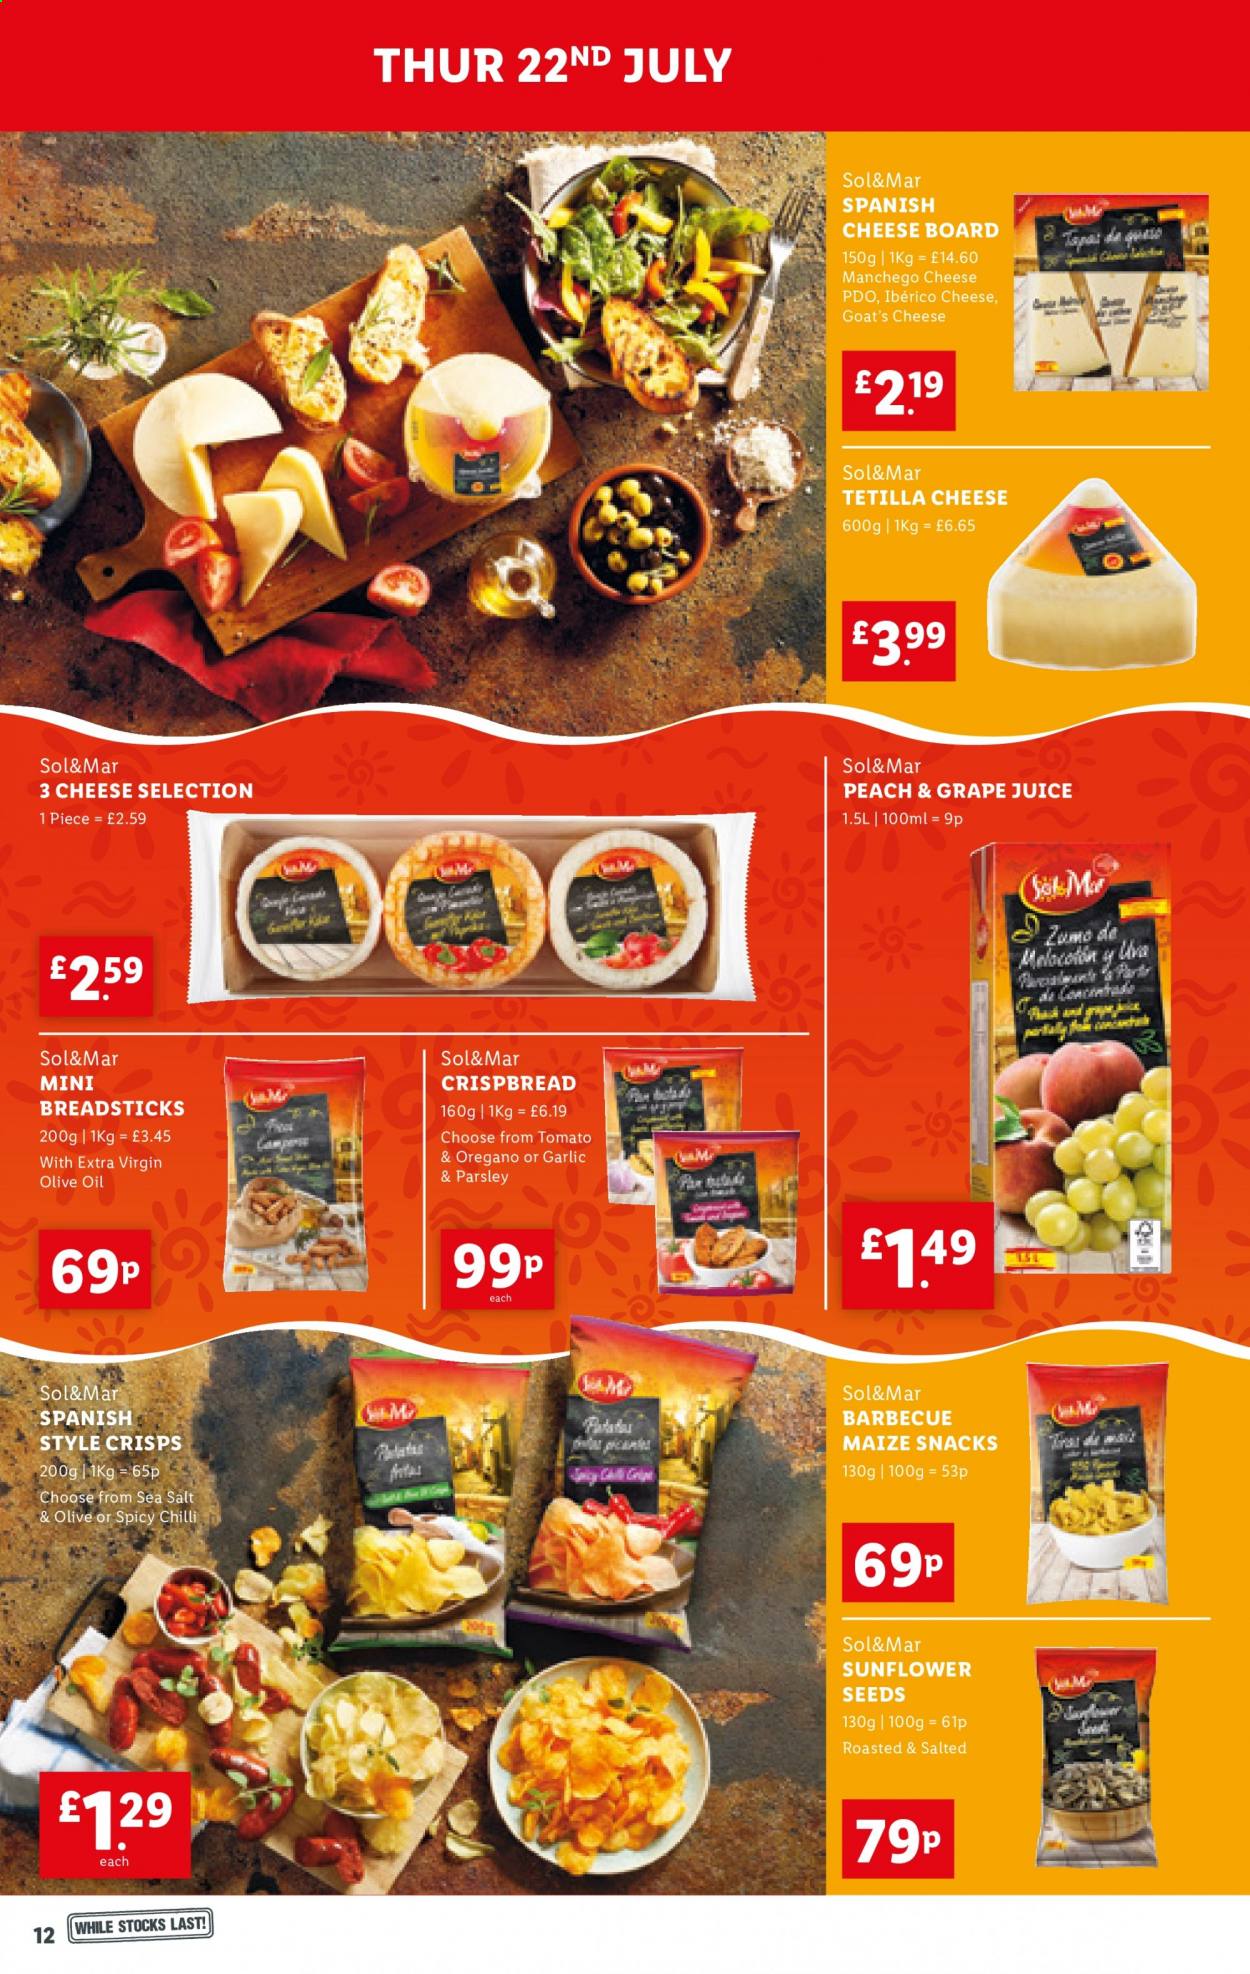 thumbnail - Lidl offer  - 22/07/2021 - 28/07/2021 - Sales products - Sol, parsley, crispbread, Manchego, cheese, snack, bread sticks, maize snack, extra virgin olive oil, oil, sunflower seeds, juice. Page 12.